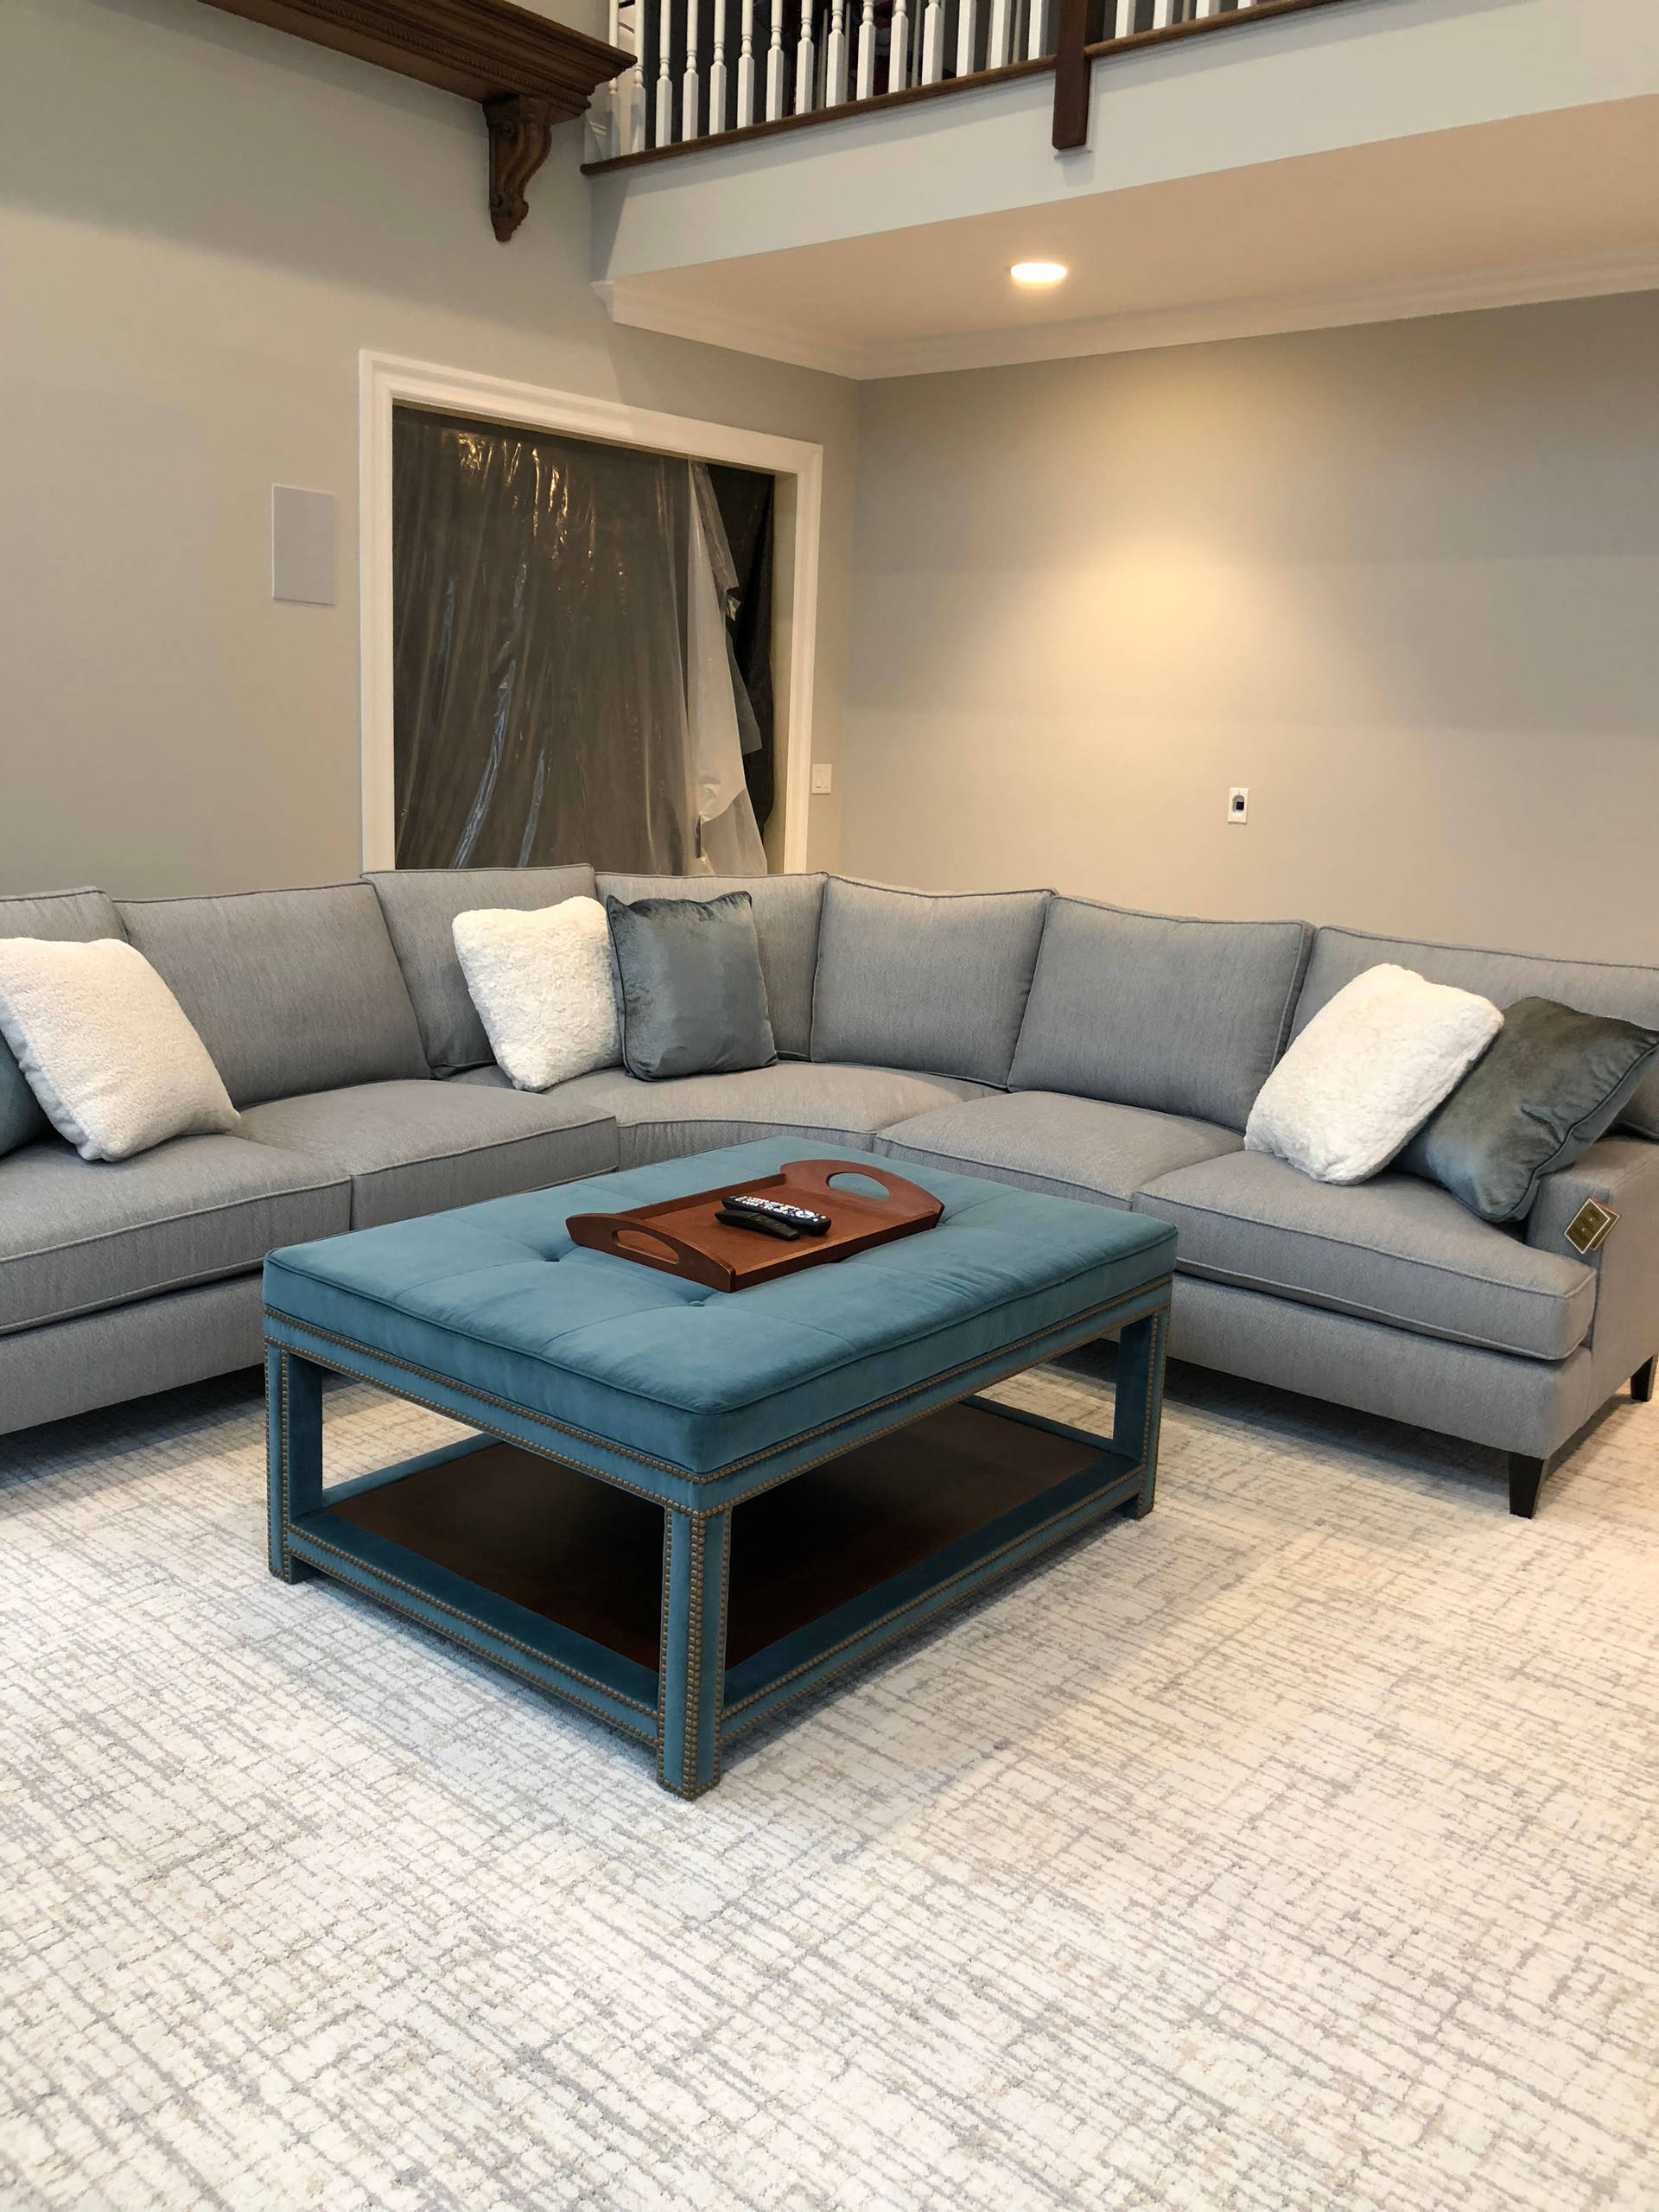 Grand Family Room Staging